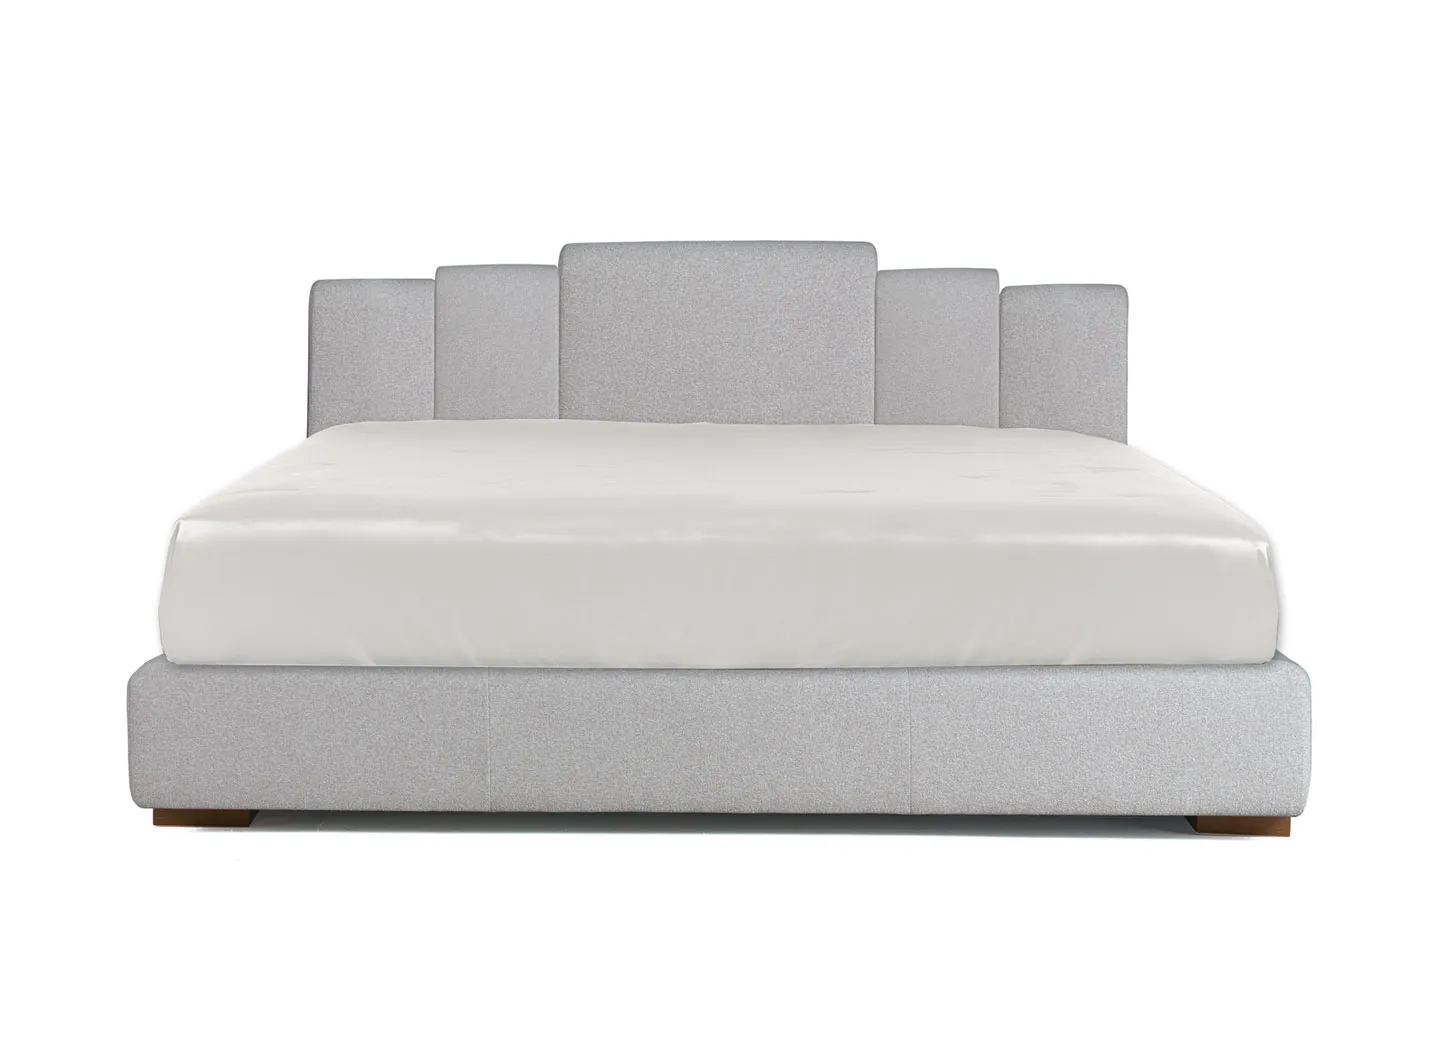 NOUVELLE VAGUE bed without footboard